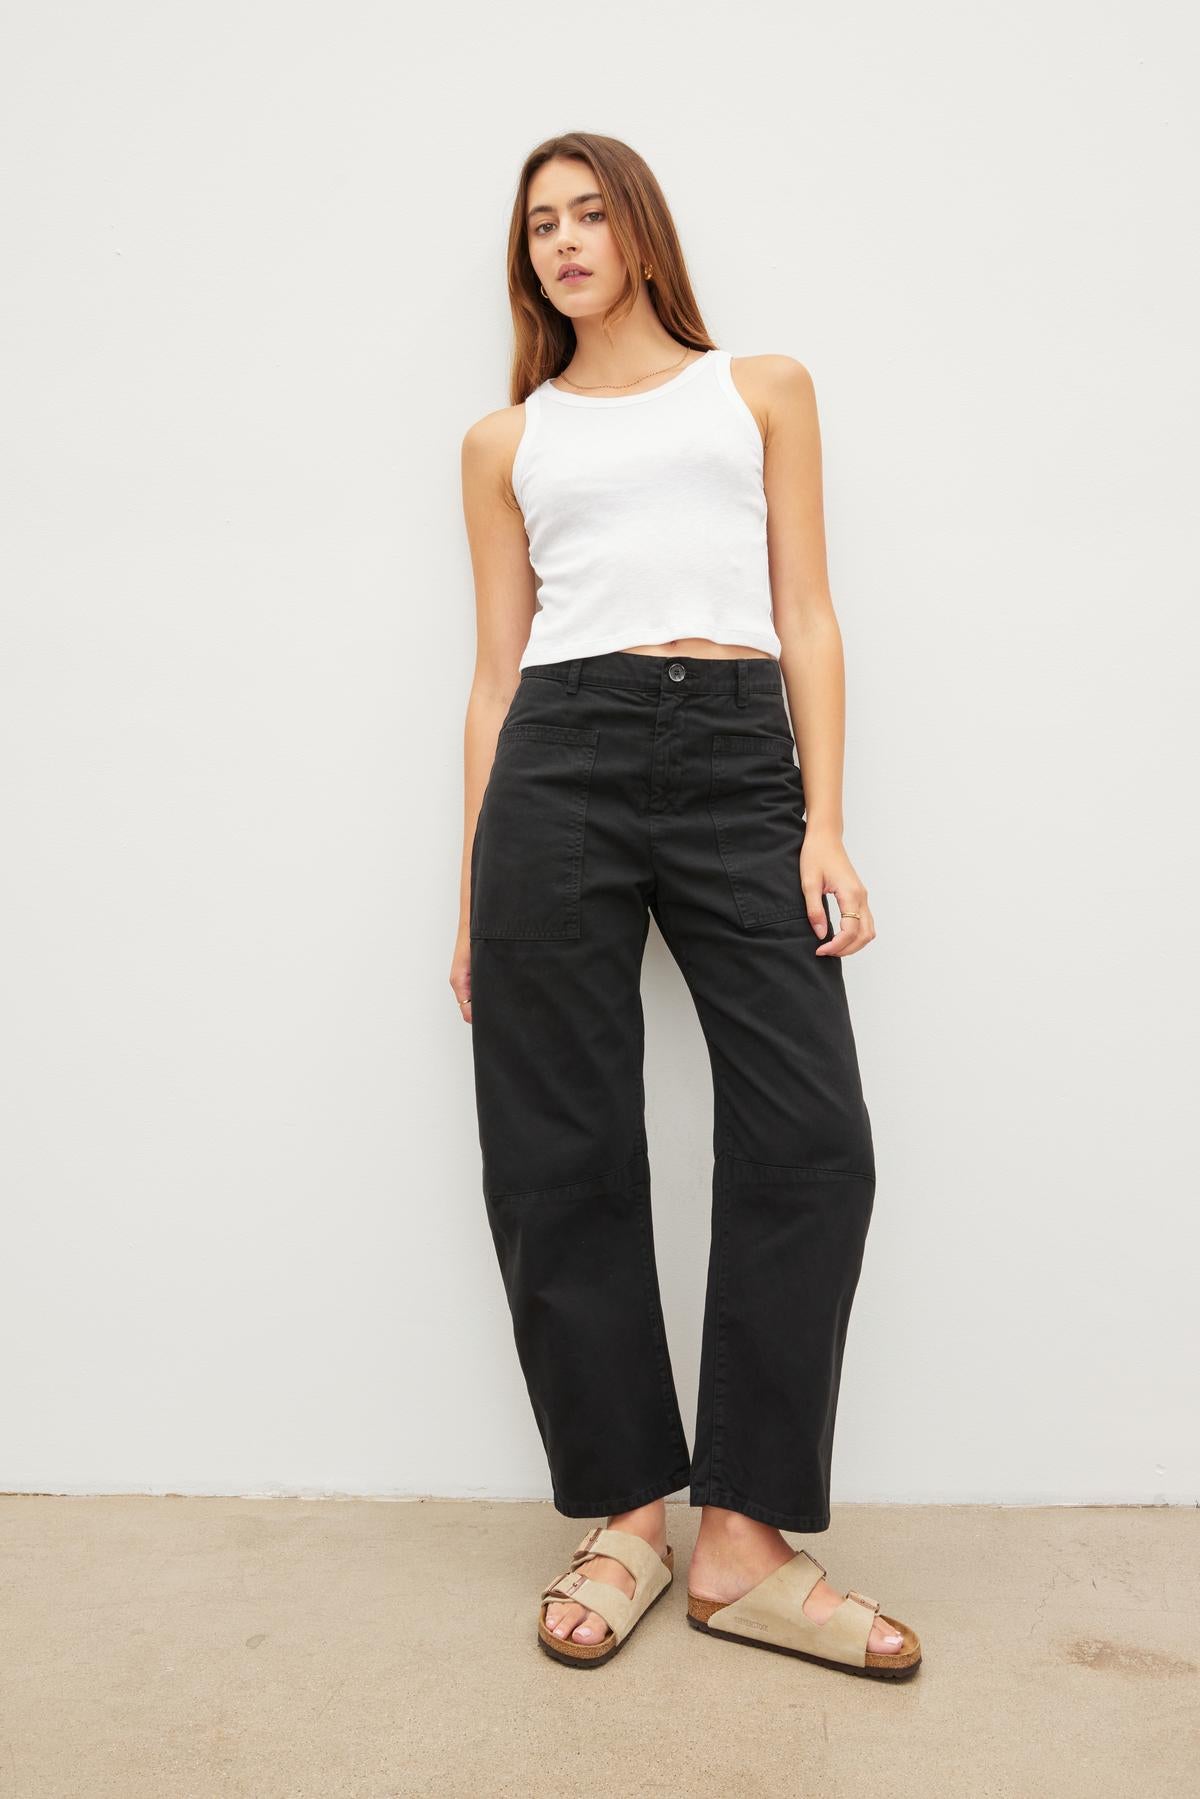 A woman wearing Velvet by Graham & Spencer's BRYLIE SANDED TWILL UTILITY PANT and a white tank top.-36040341487809